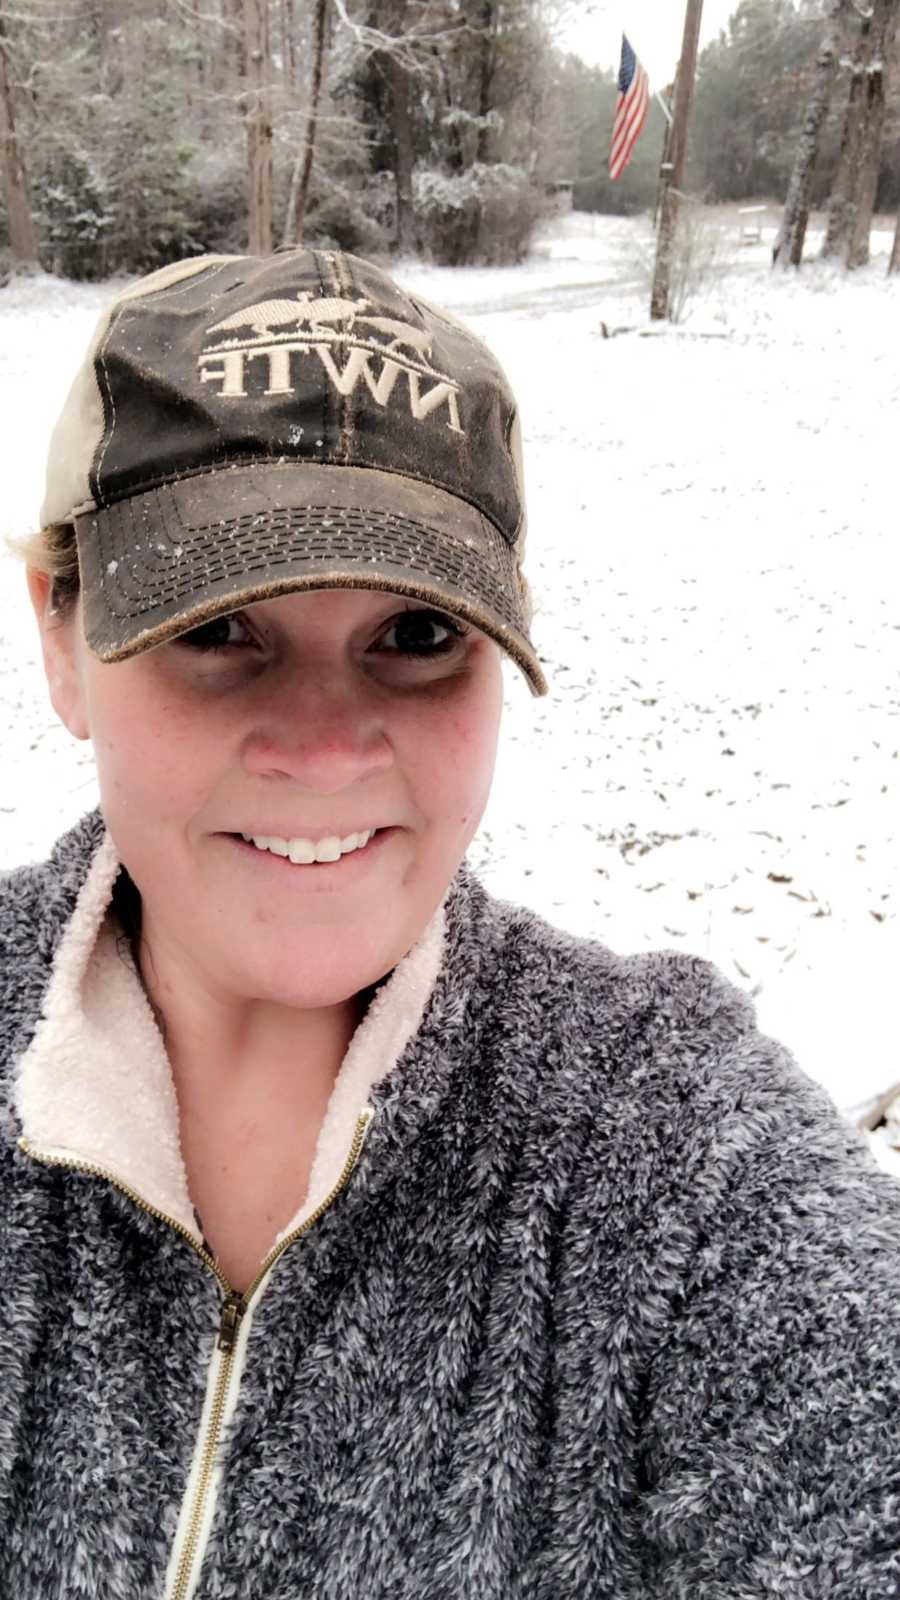 Woman who is now sober smiles in selfie outside in winter weather